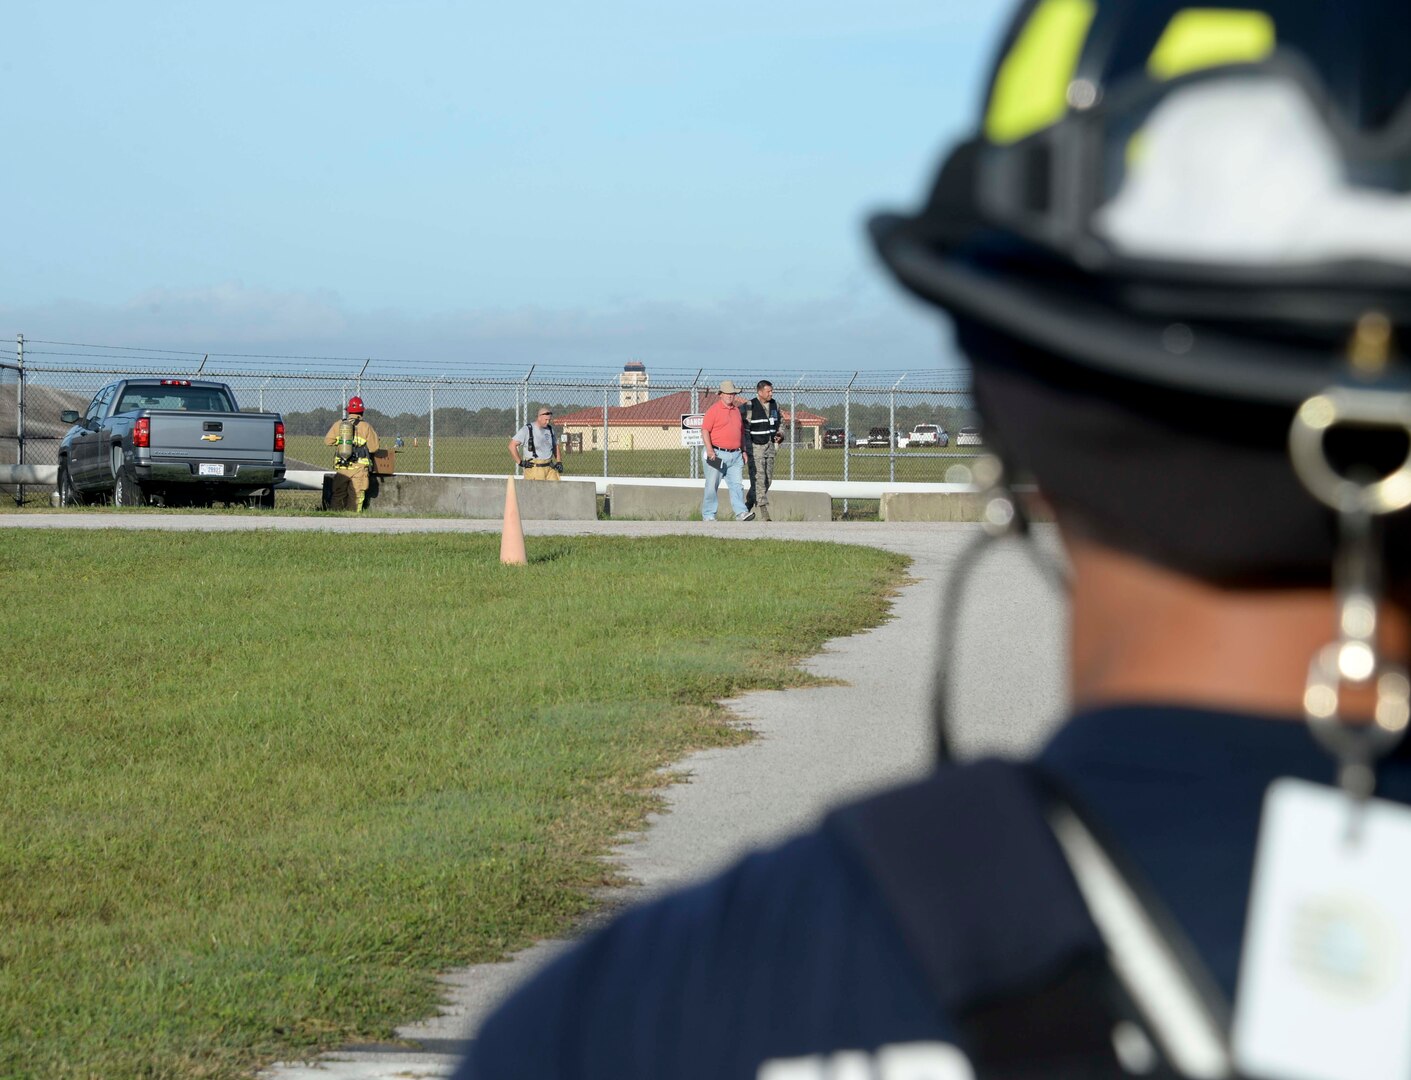 A firefighter from the 6th Civil Engineer Squadron looks on as other firefighters check for environmental damage during an Emergency Management exercise at MacDill Air Force Base, Fla., Sept. 13, 2016. The exercise simulated a fuel spill that resulted from a vehicle accident. (U.S. Air Force photo by Senior Airman Vernon L. Fowler Jr.)